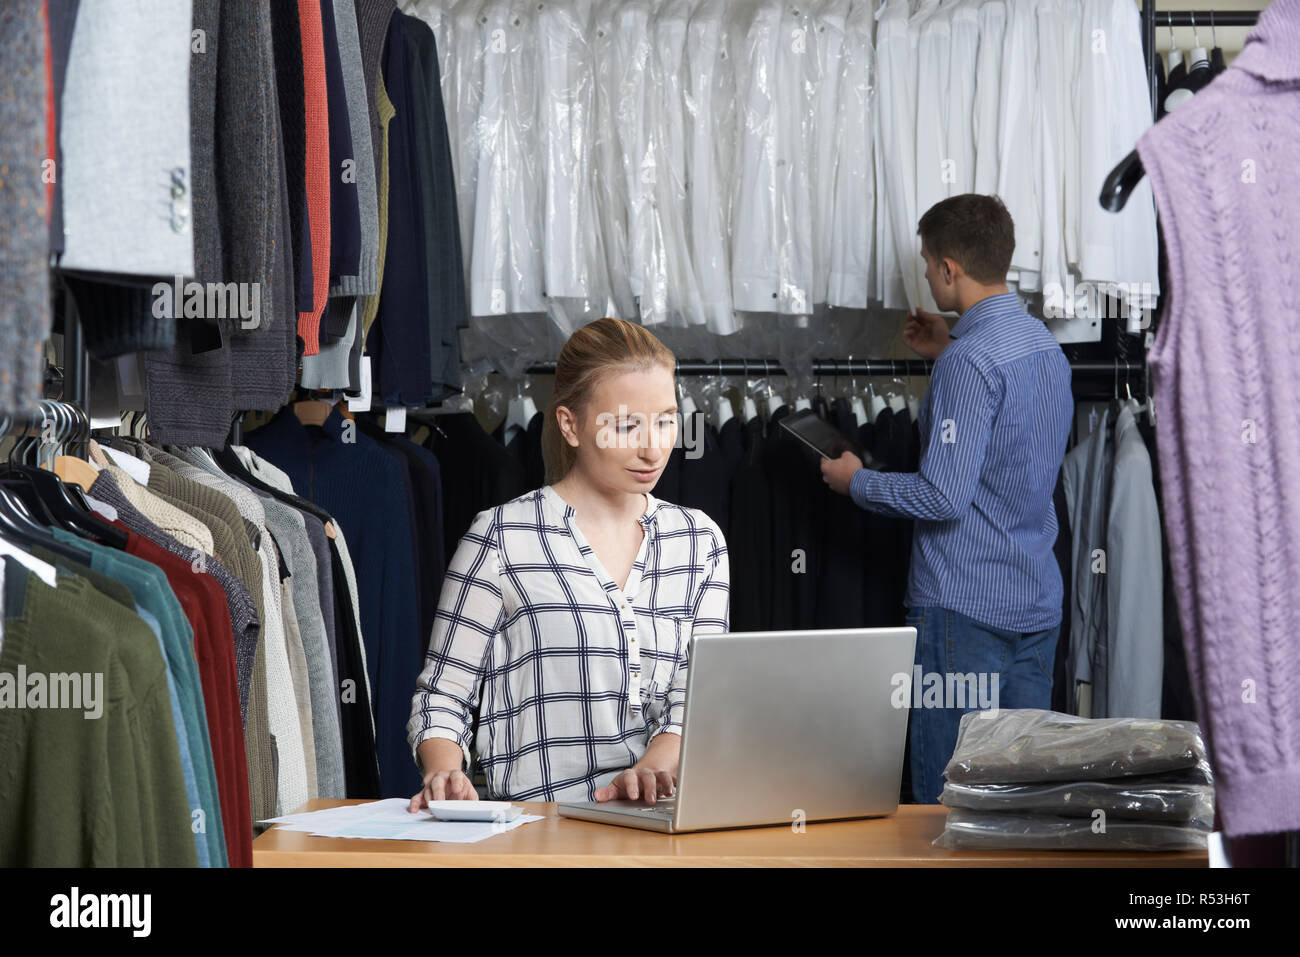 Couple Running On Line Fashion Business Working In Warehouse Stock Photo